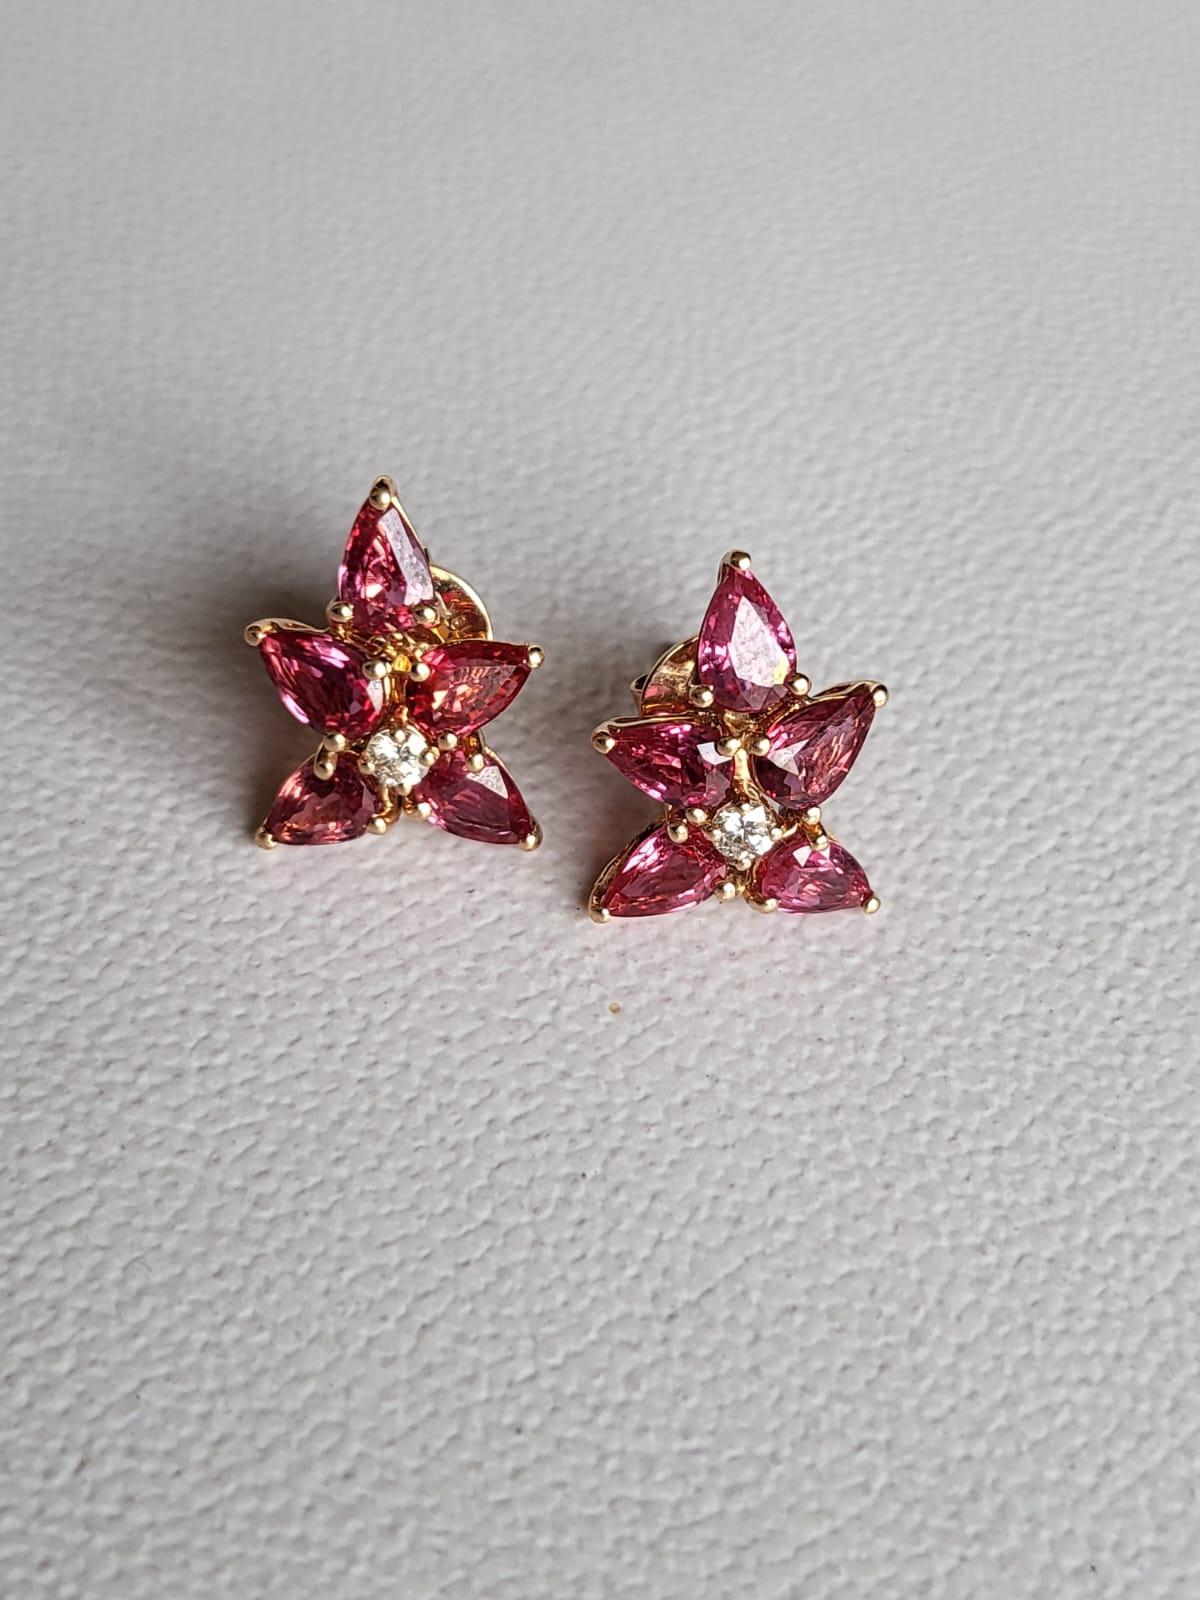 Pear Cut Set in 18k Rose Gold, 4 Carats, Natural Mozambique Ruby & Diamonds Stud Earrings For Sale